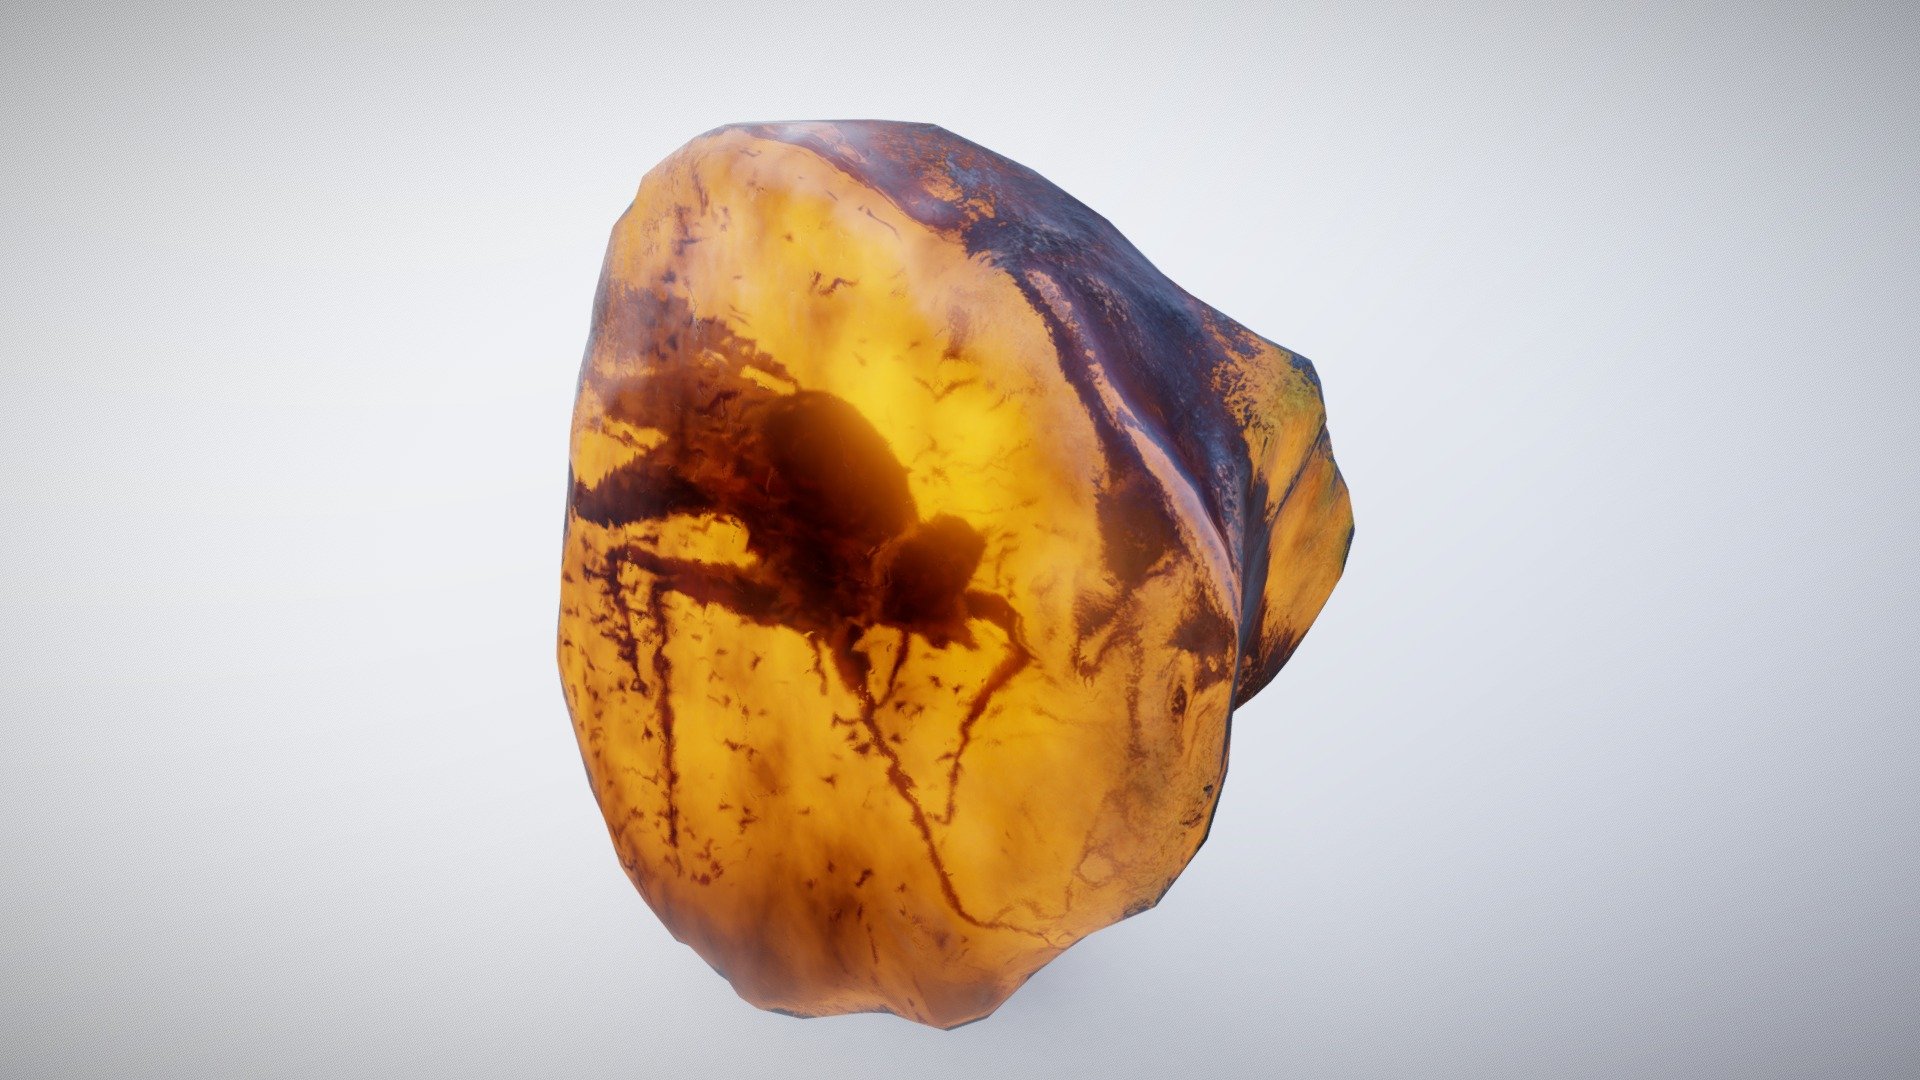 Messing around with refractive materials!



The Mosquito scan (415k tris) is from Geoffrey Marchal.

Modeling:




The scan was first remeshed with mmgs and baked to a lighter version (11k tris). 

The amber fragment was roughly sculpted in blender (&ldquo;I have no clue what I'm doing